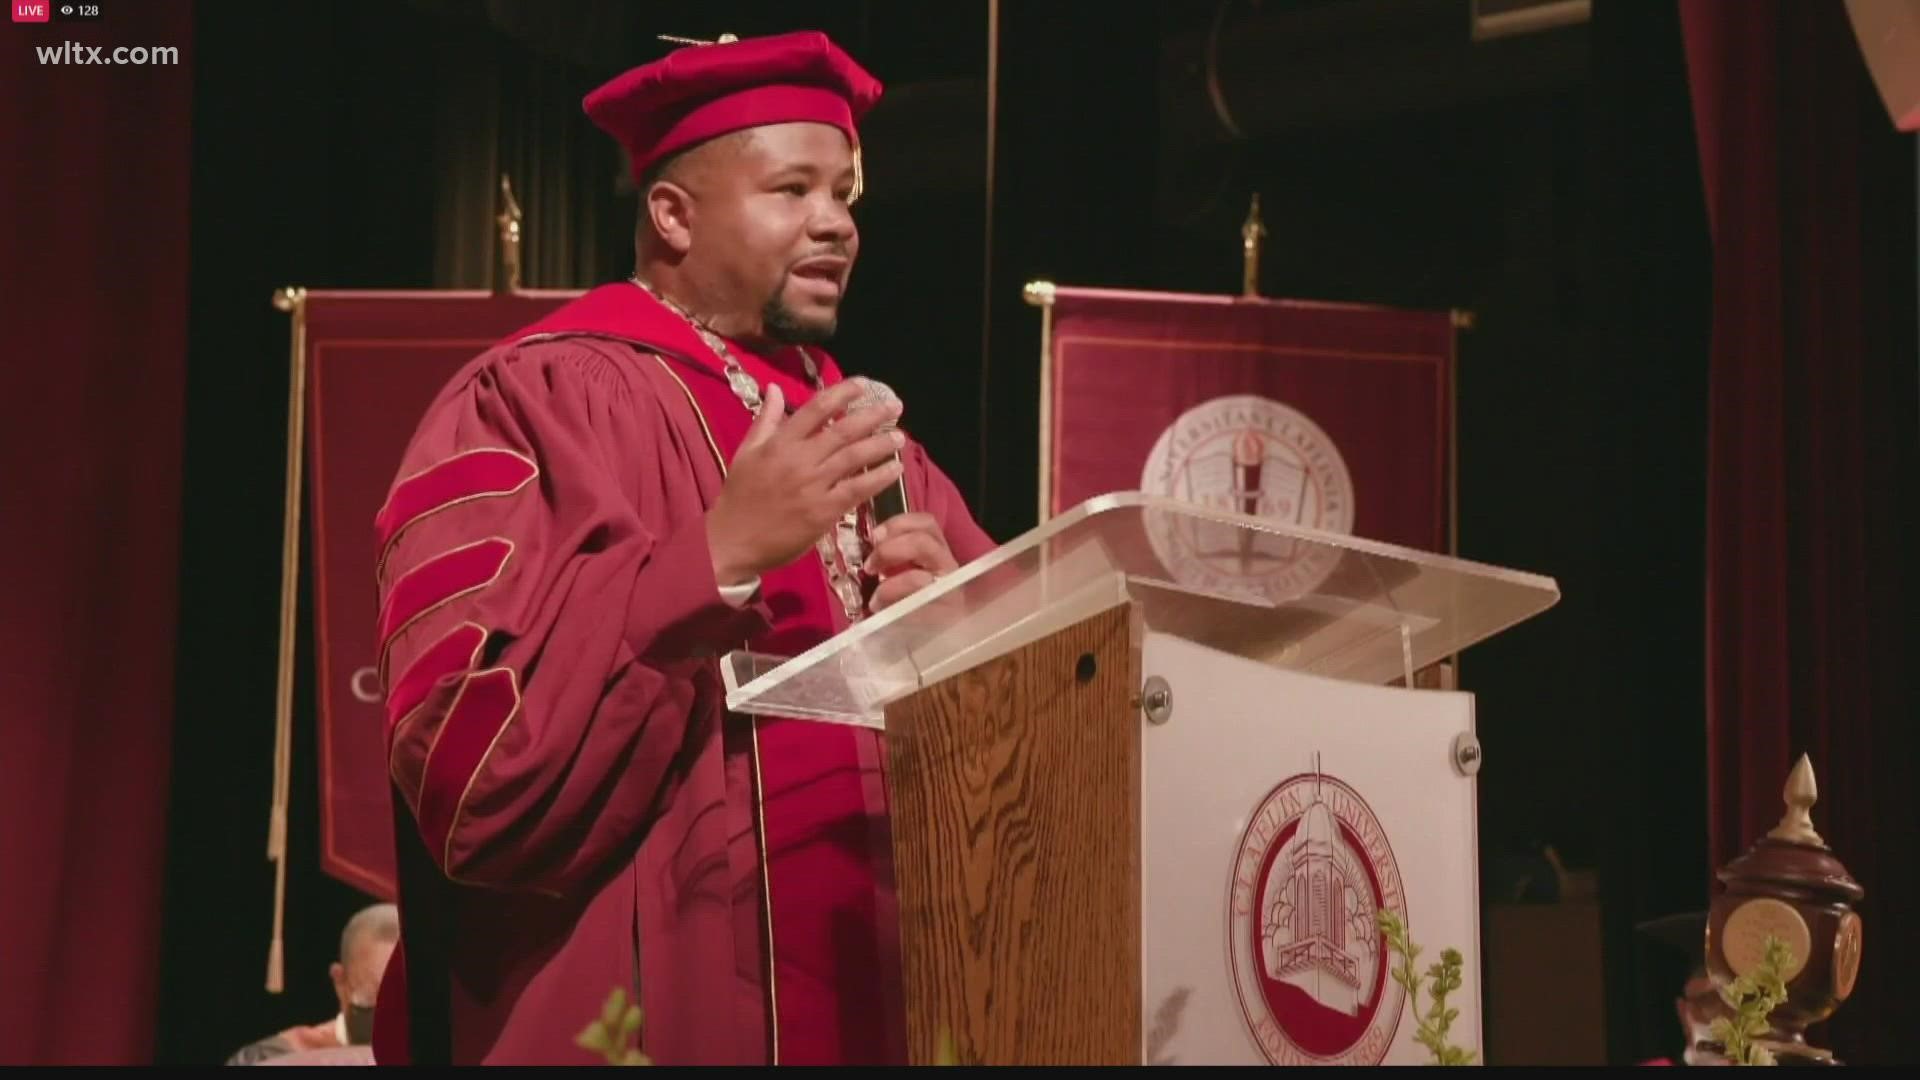 Dwaun Warmack is Claflin University's ninth president after being inaugurated on Friday. He began his tenure in August 2019.